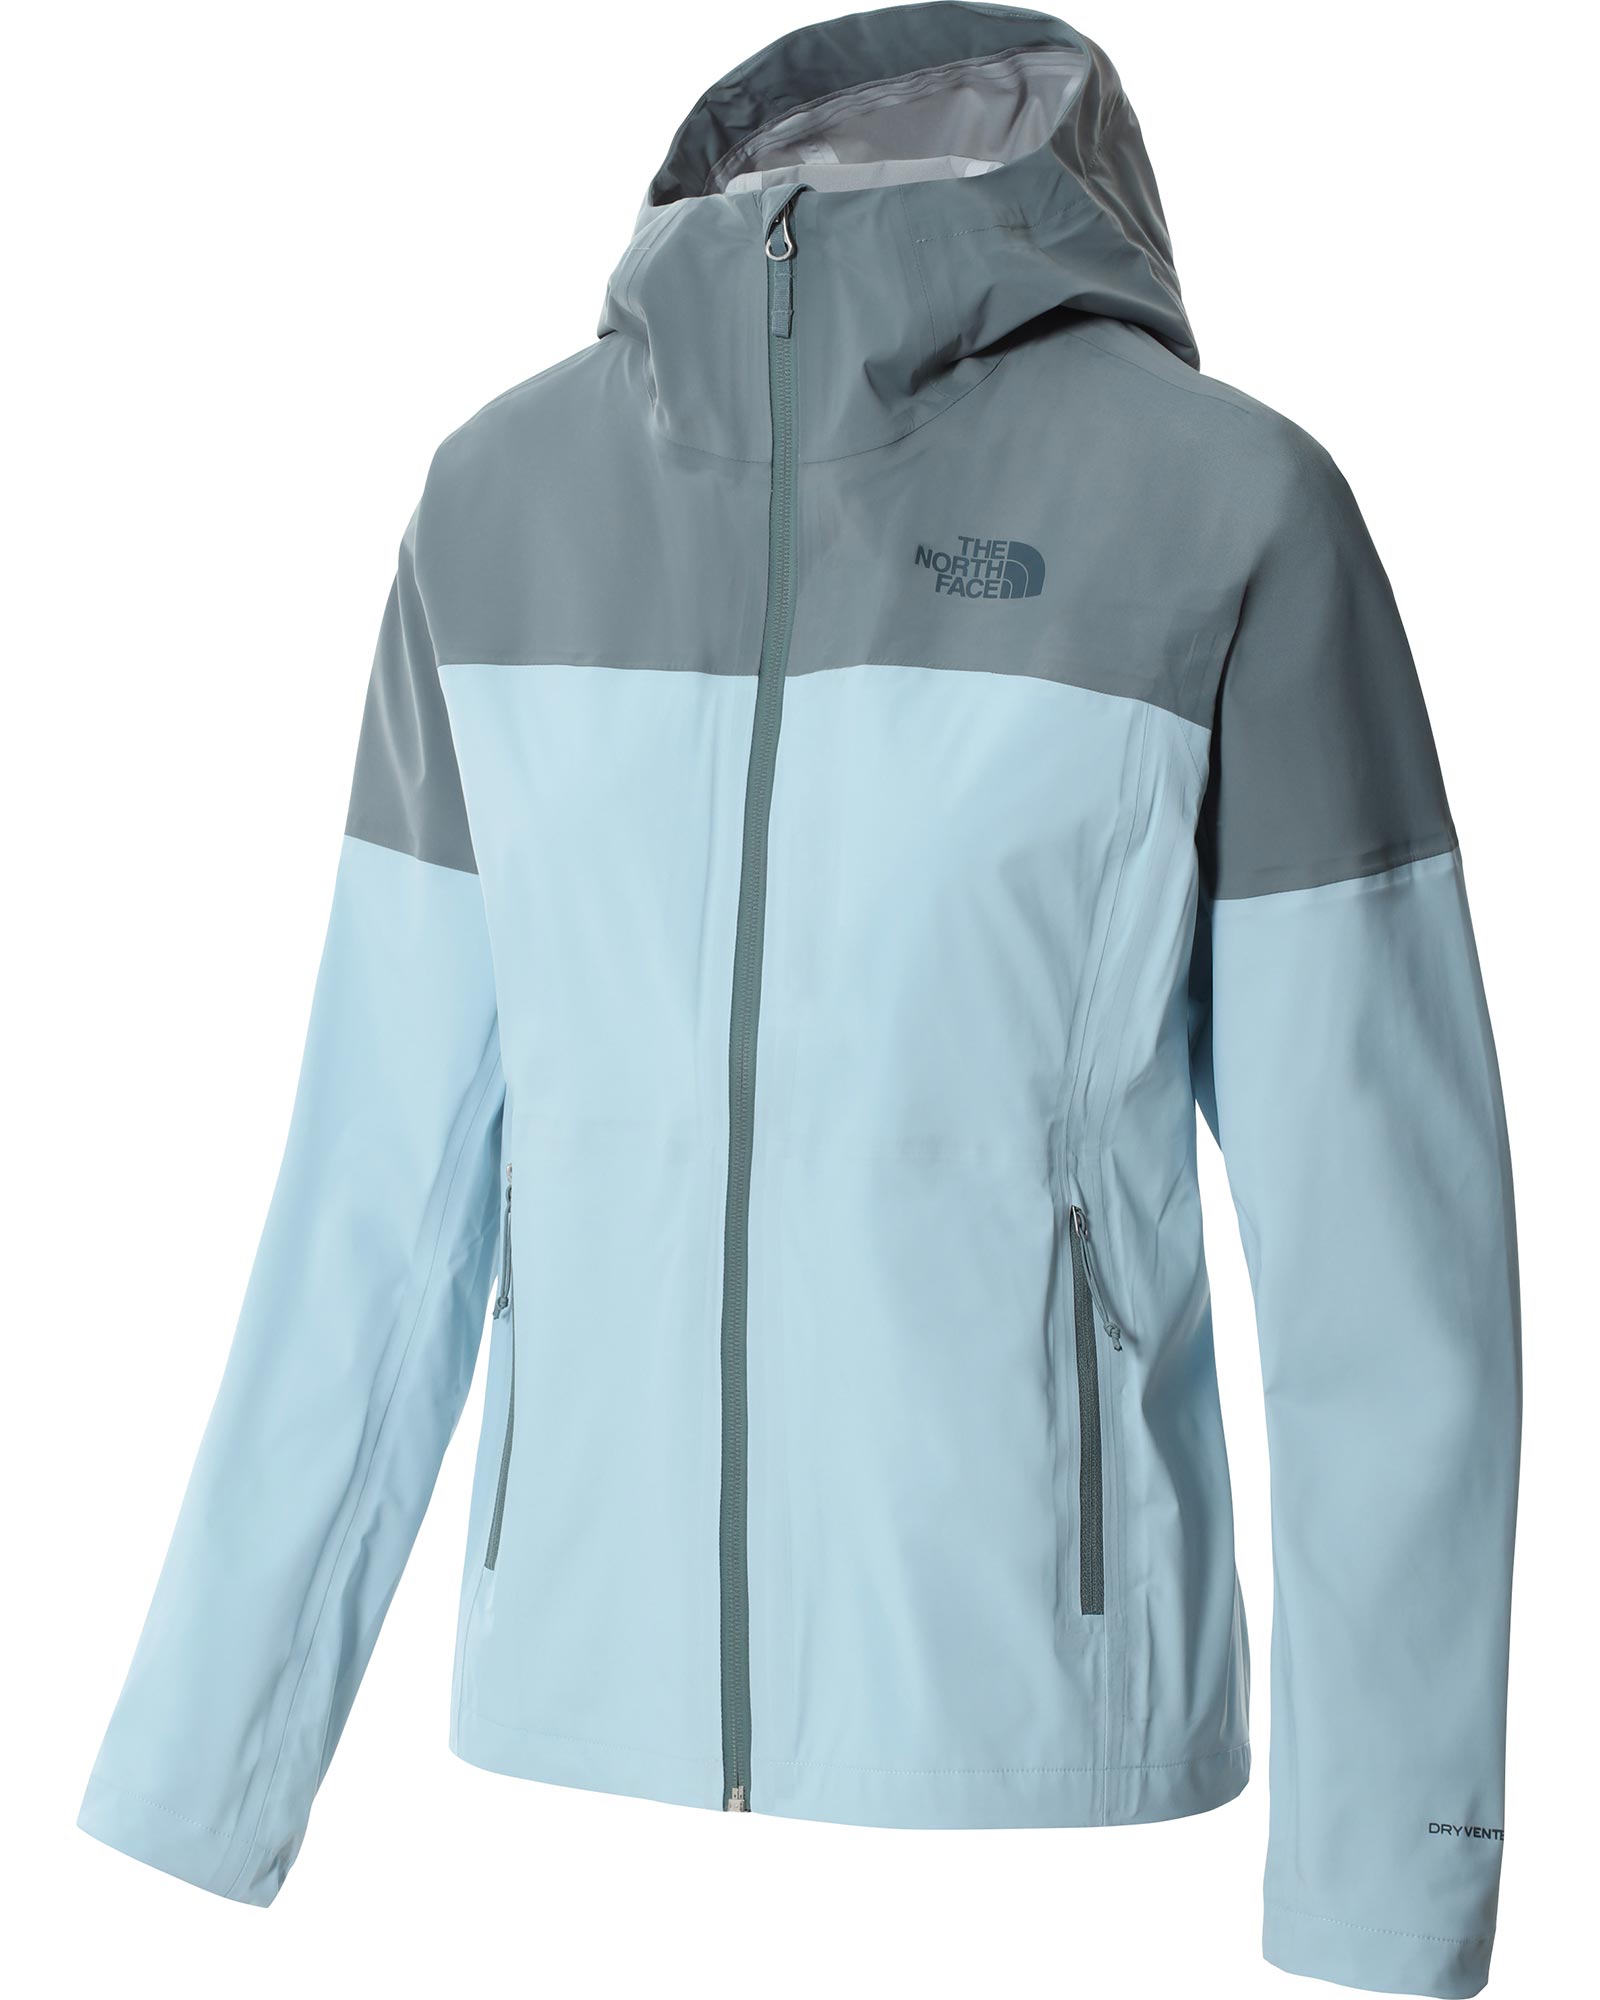 The North Face West Basin Dryvent Womens Jacket